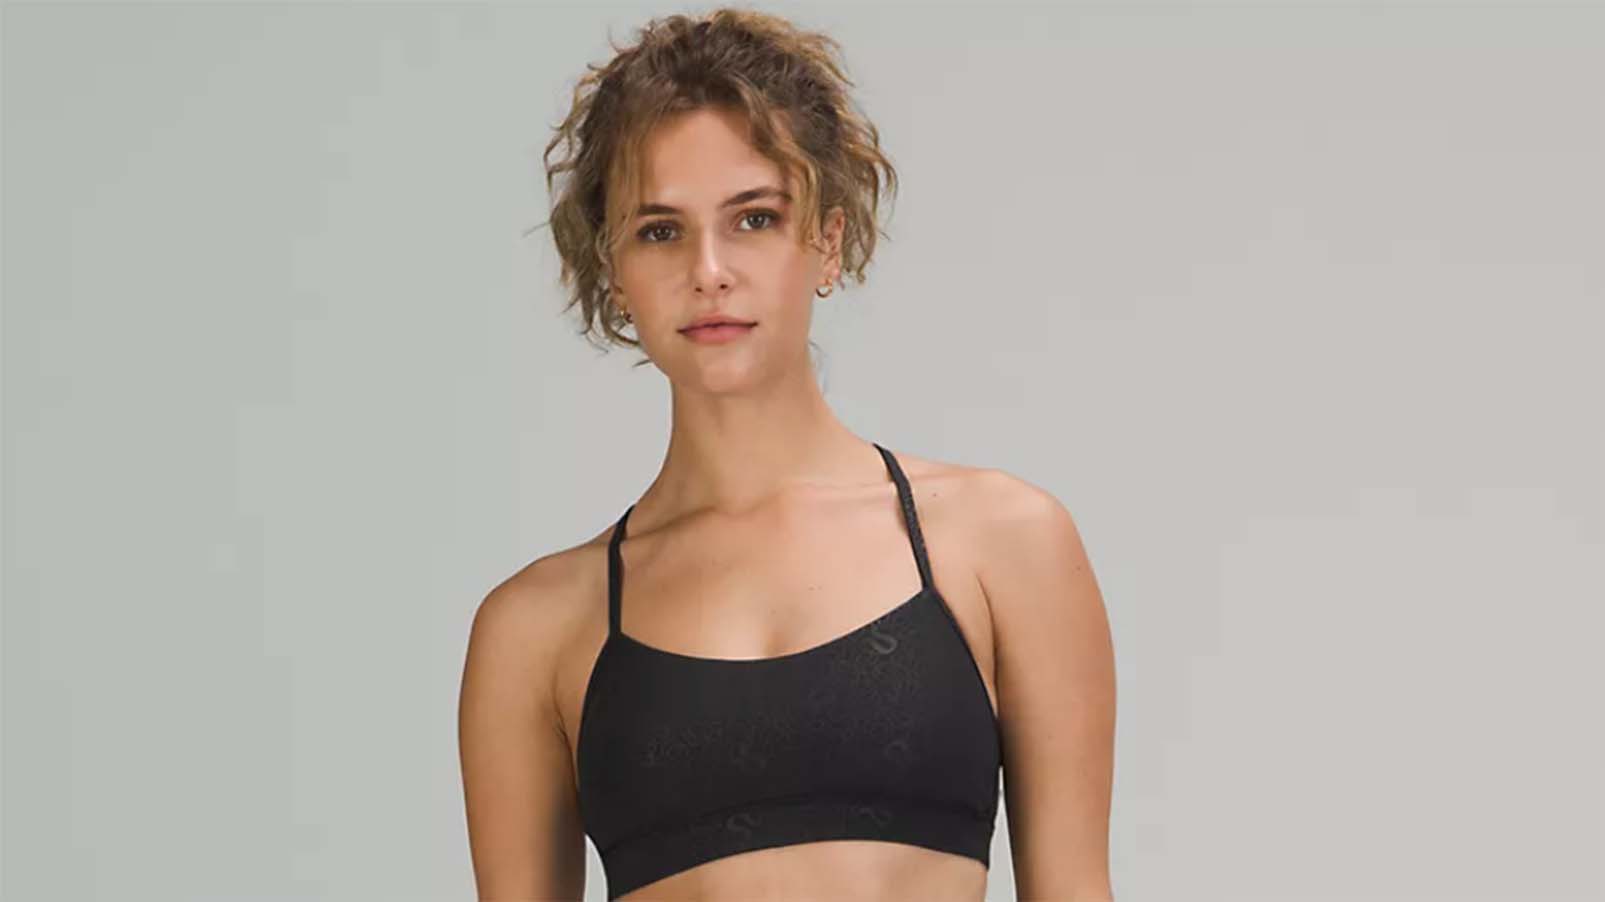 20 Best Sports Bra for Yoga That You Need for Your Practice